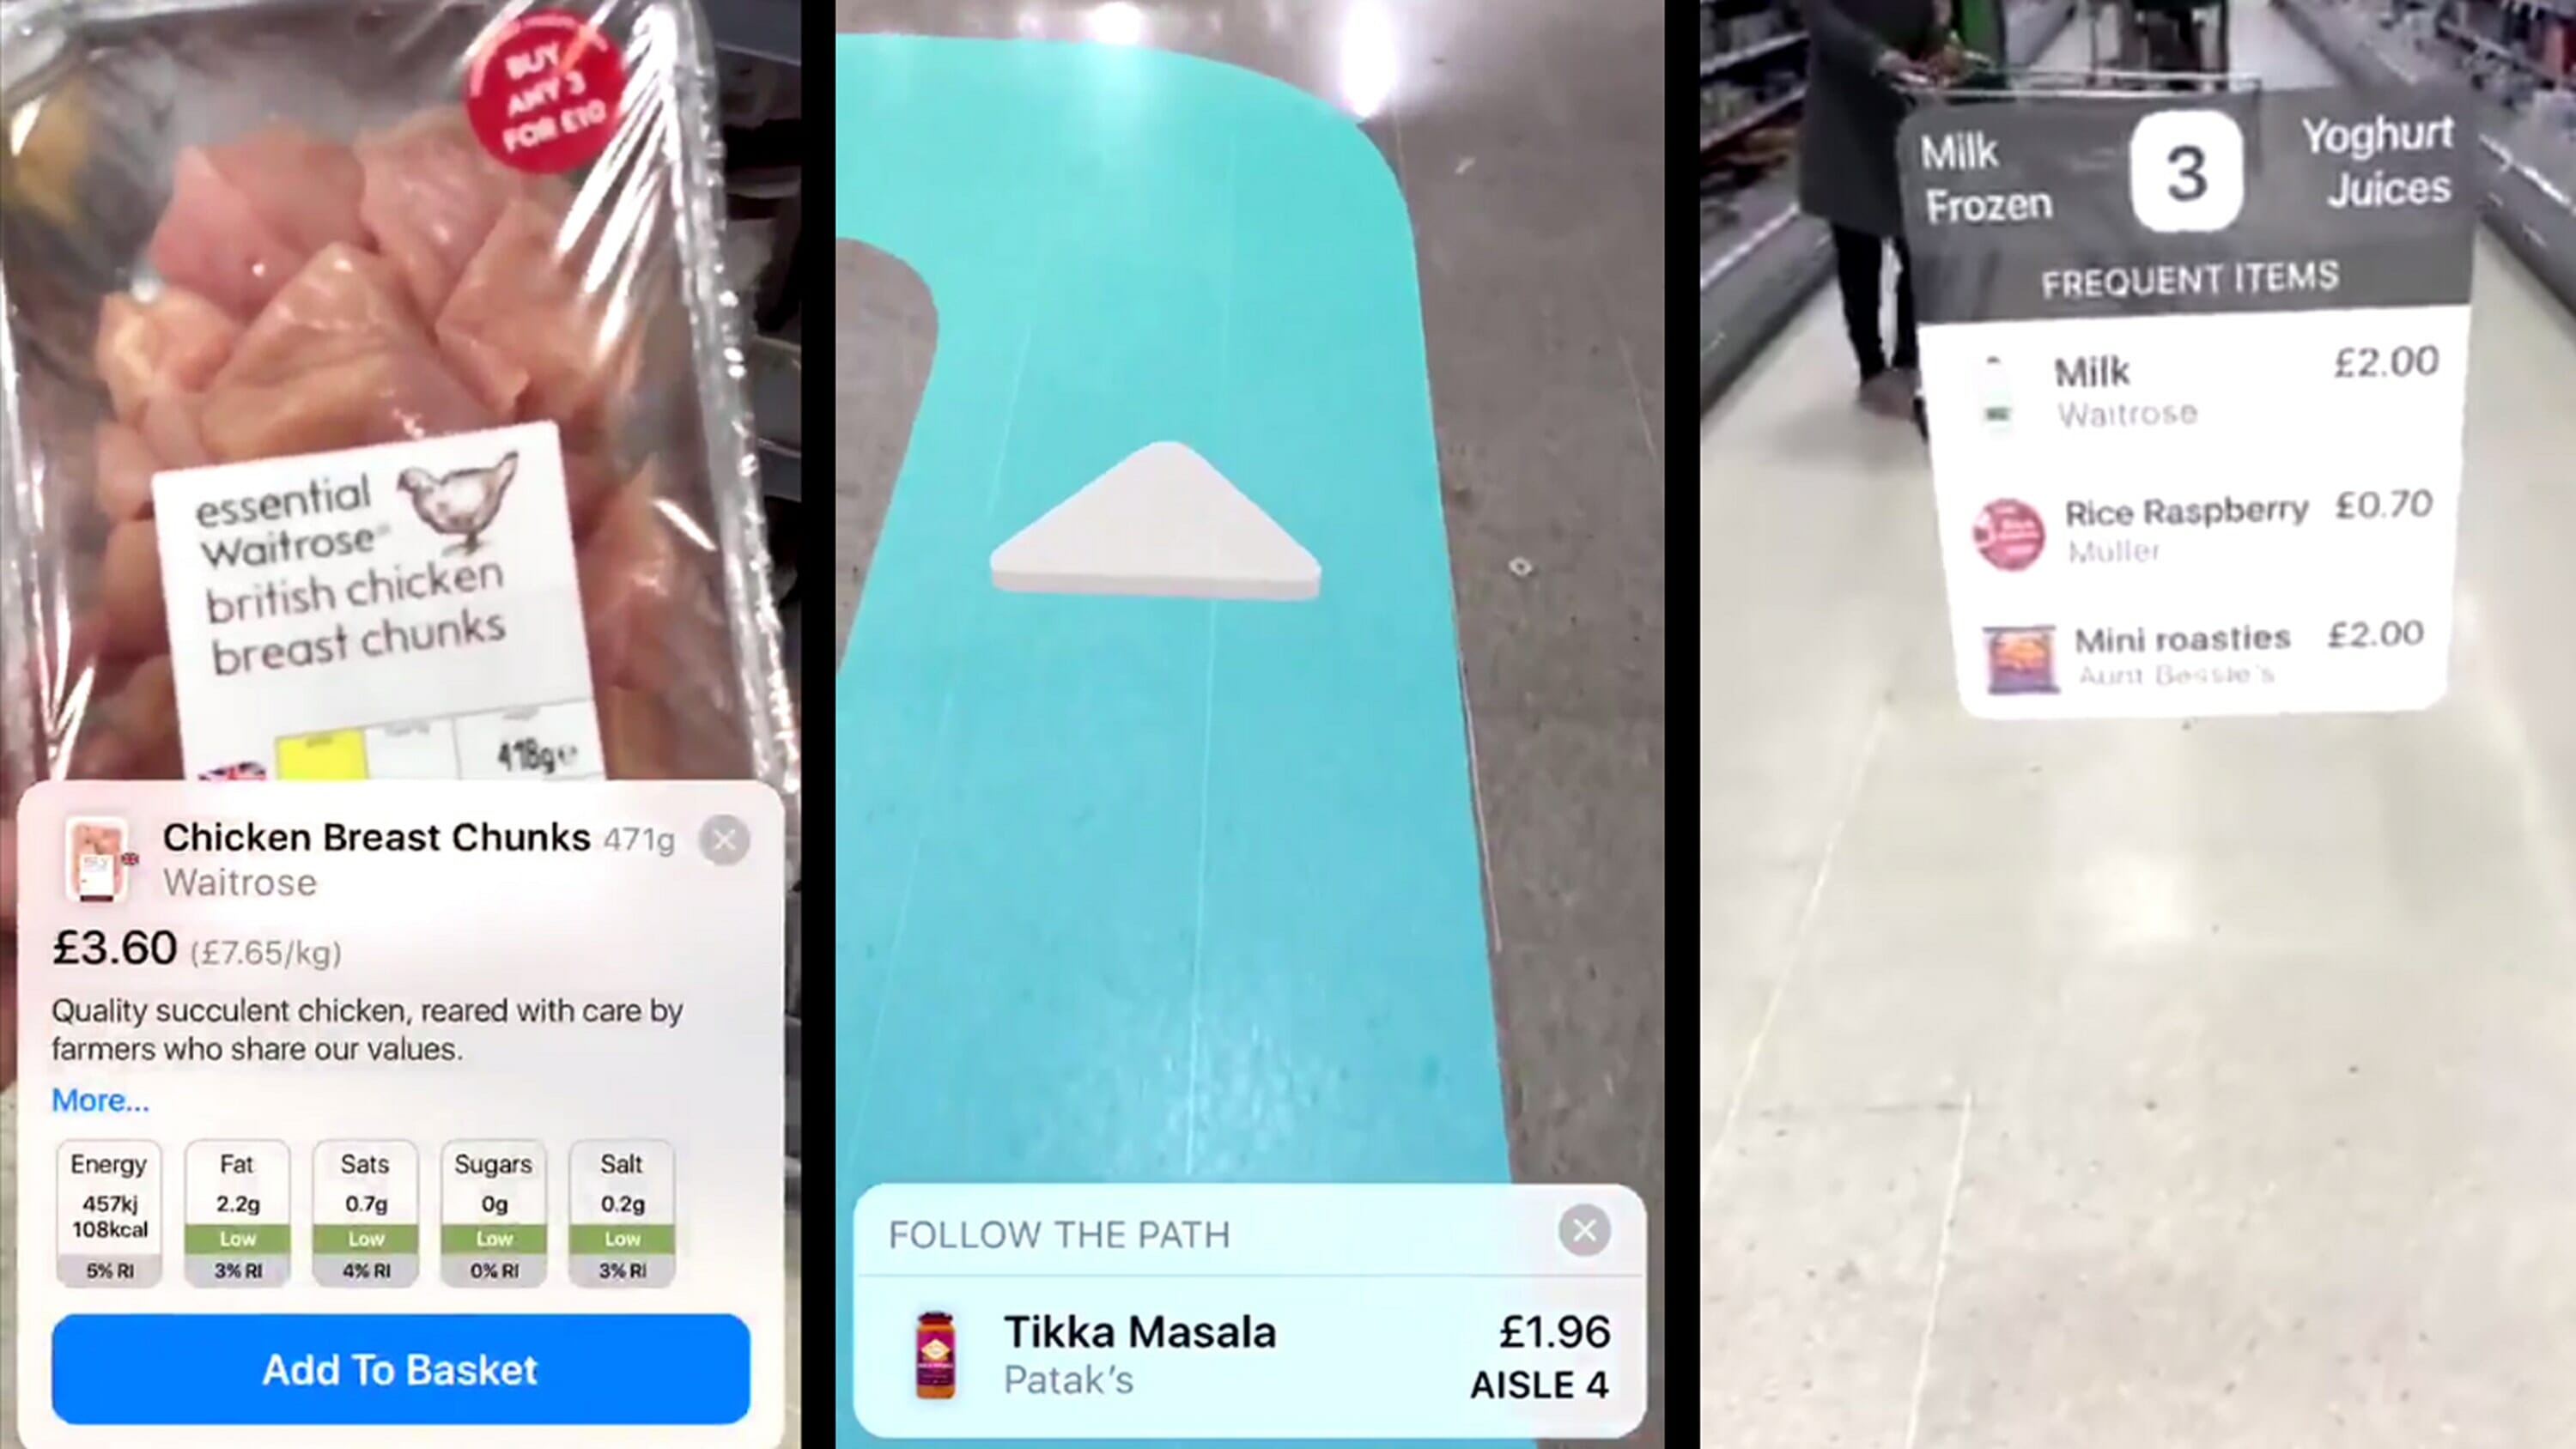 augmented reality shopping